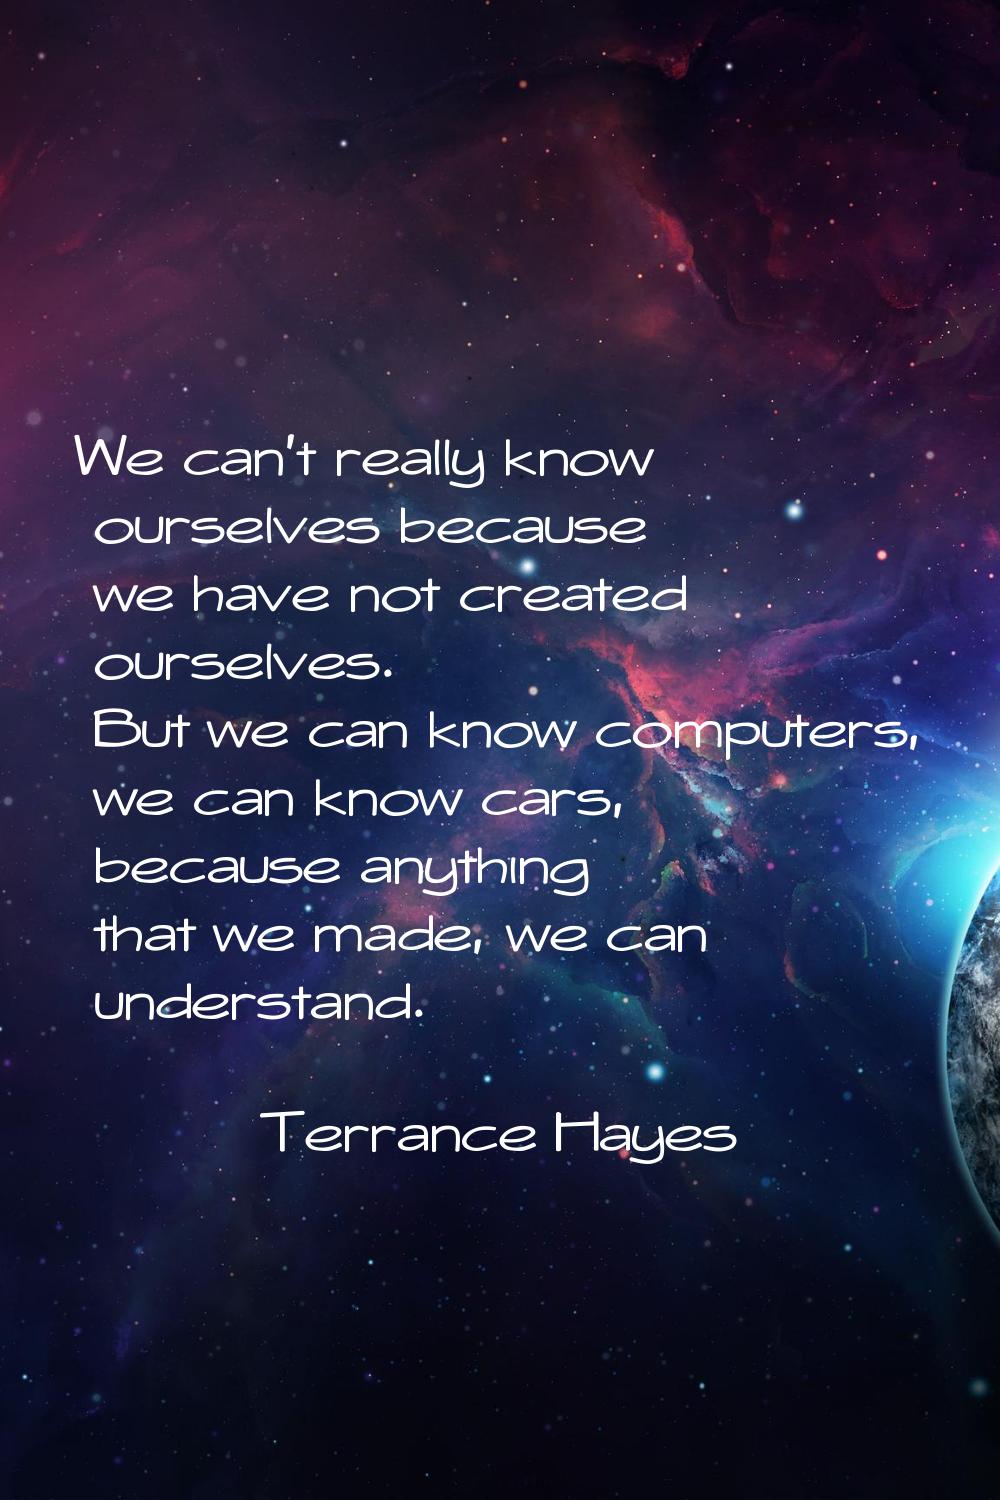 We can't really know ourselves because we have not created ourselves. But we can know computers, we